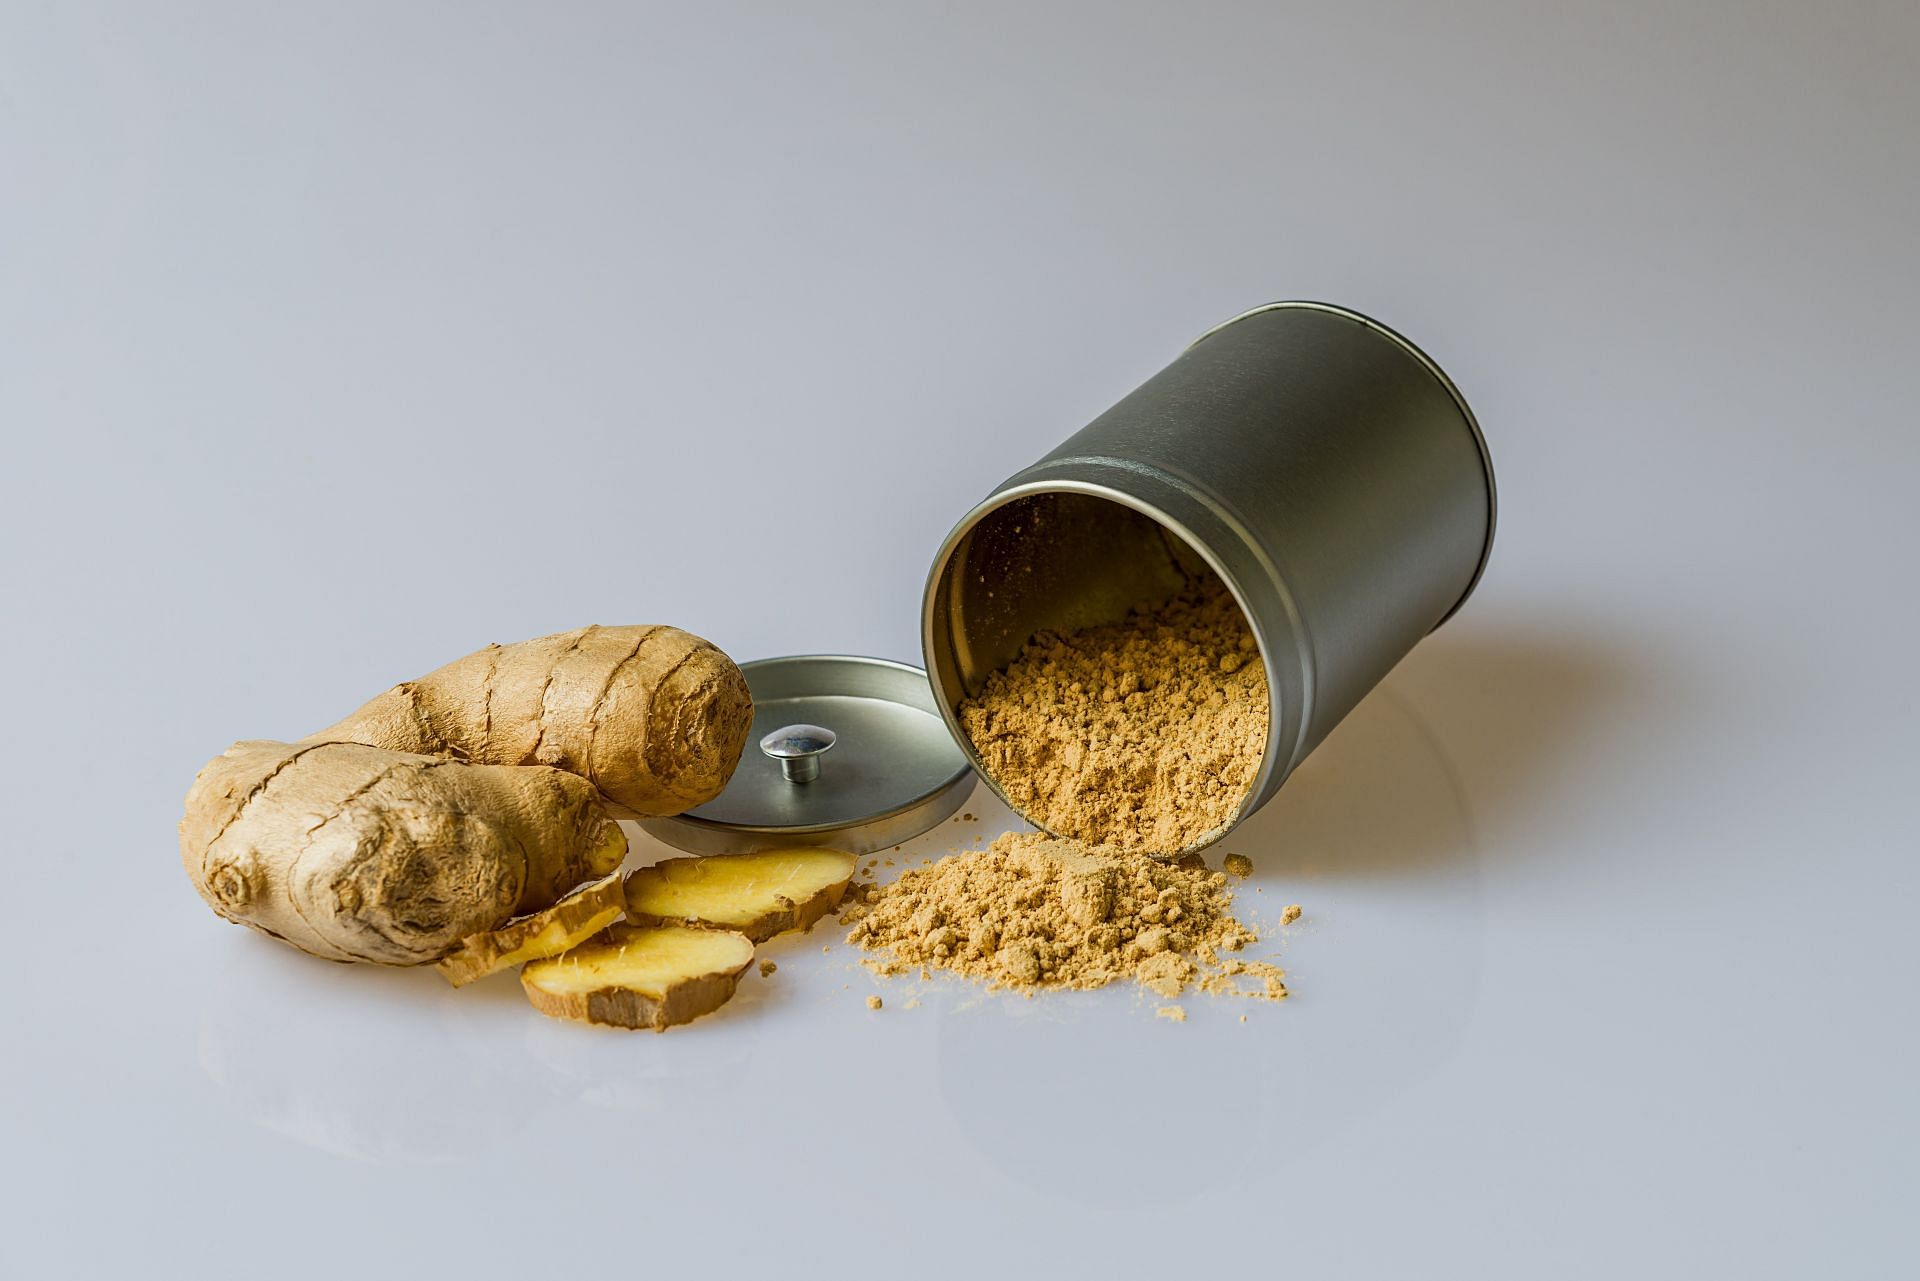 Ginger is one of the best ways to treat your diarrhea at home. (Image via Pexels/Pixabay)